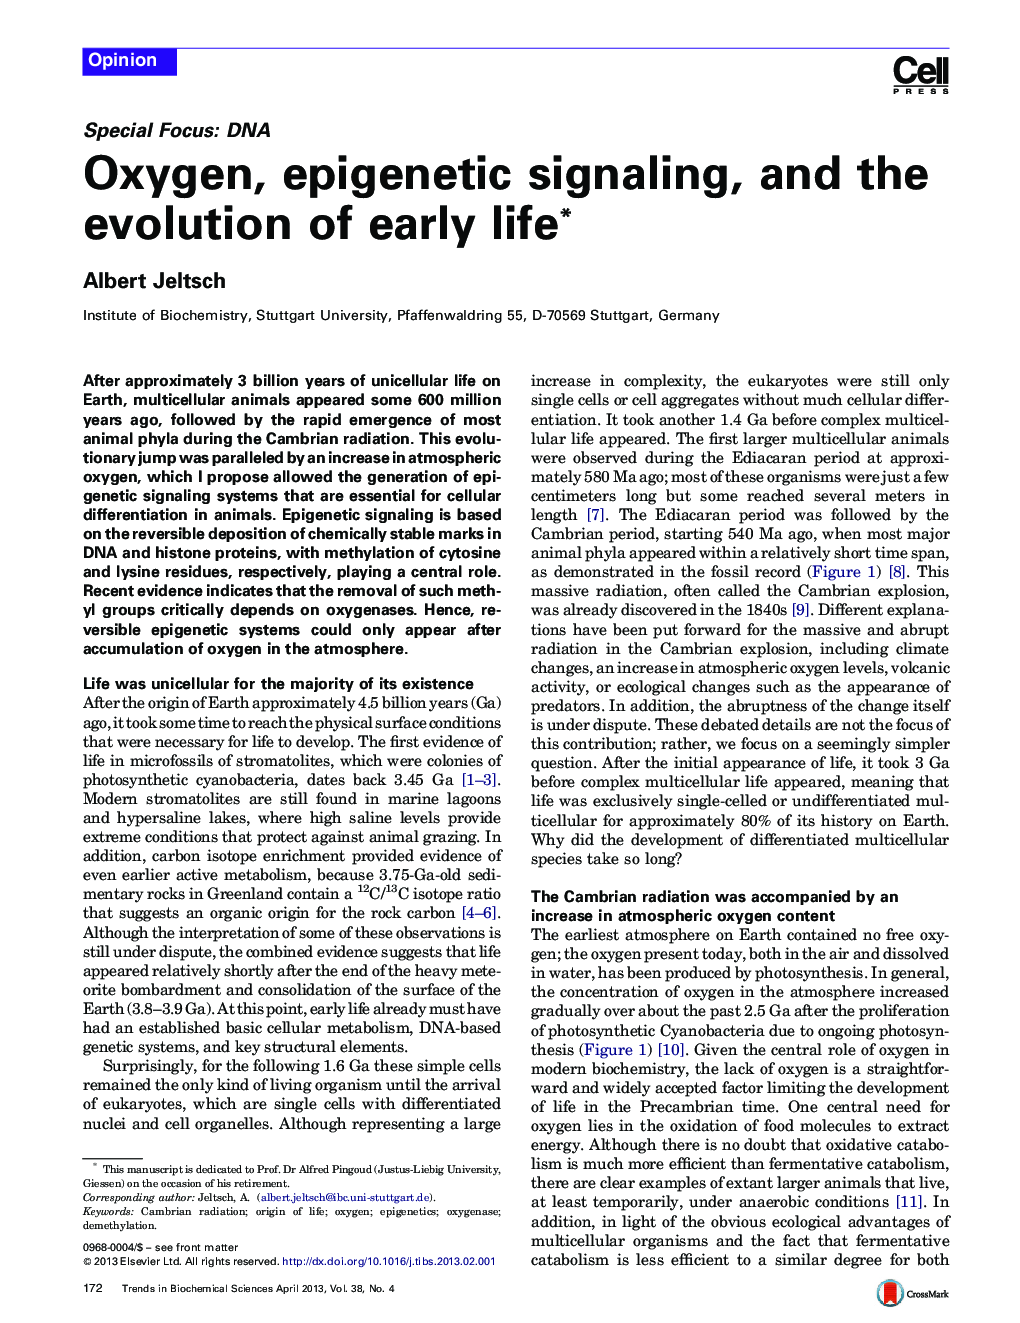 Oxygen, epigenetic signaling, and the evolution of early life *